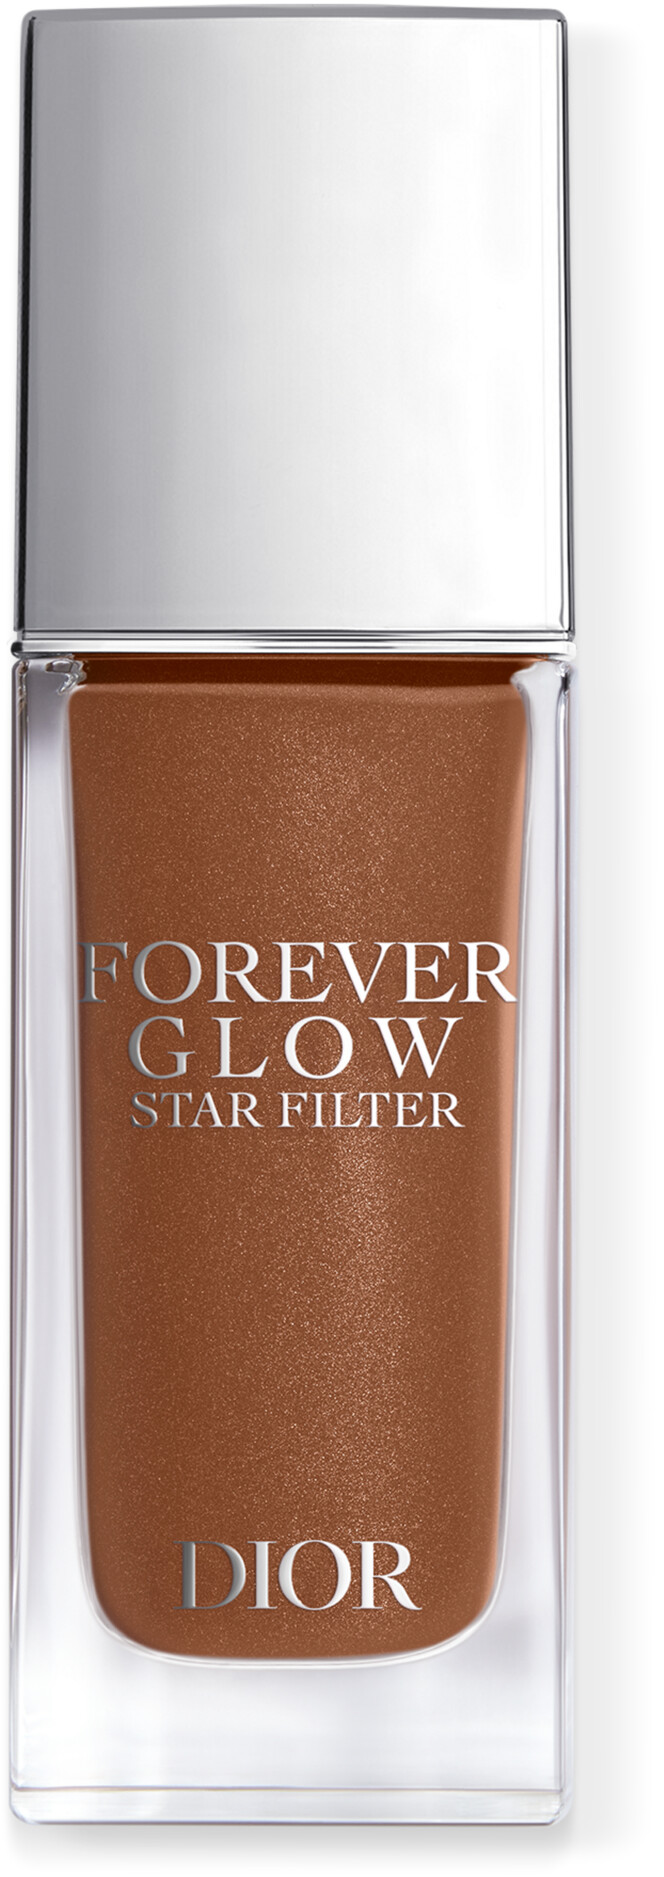 DIOR Forever Glow Star Filter 30ml 7